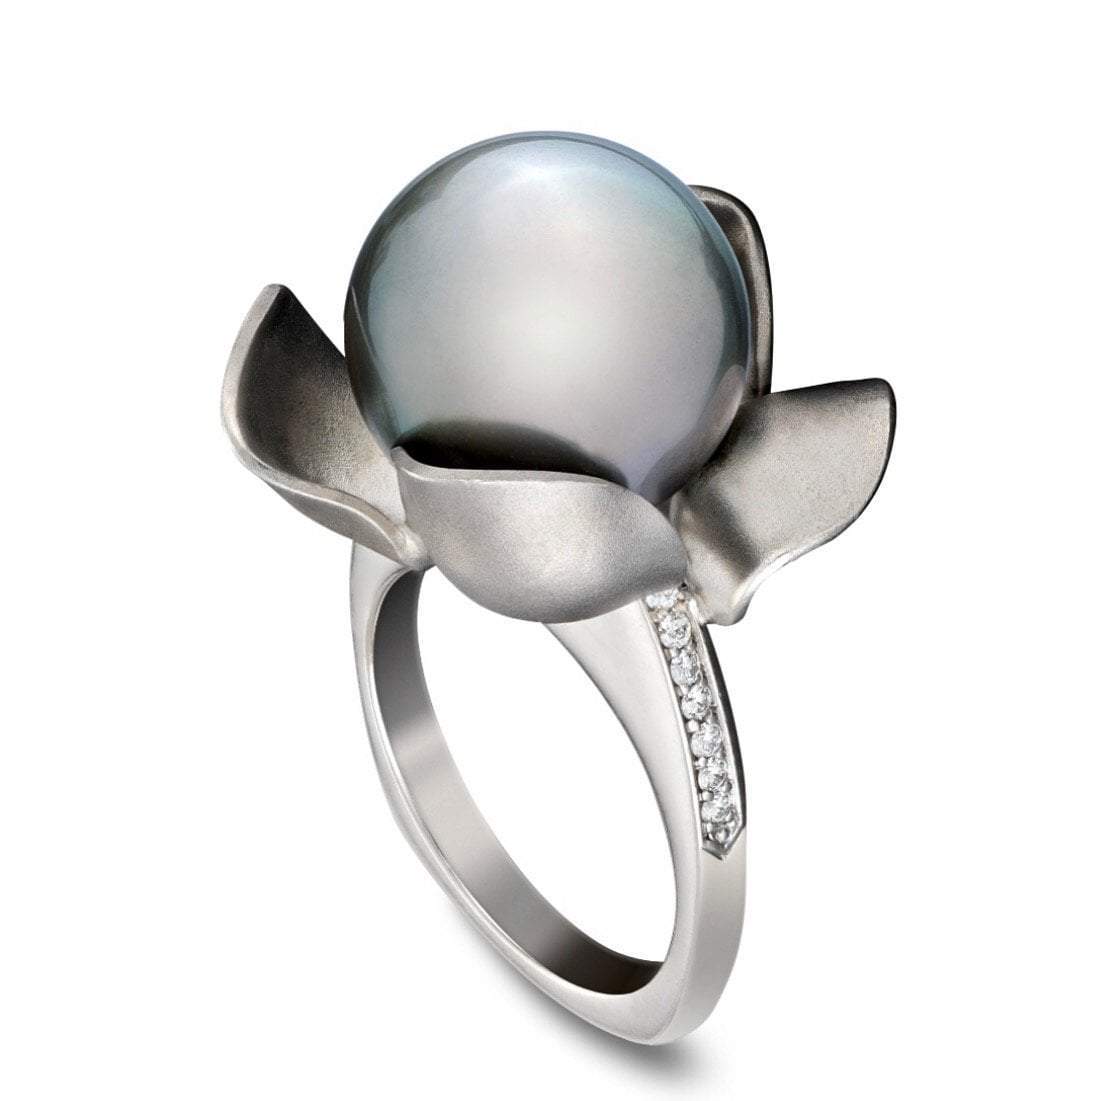 Southern Magnolia Tahitian Cultured Pearl Ring - Ashleigh Branstetter®